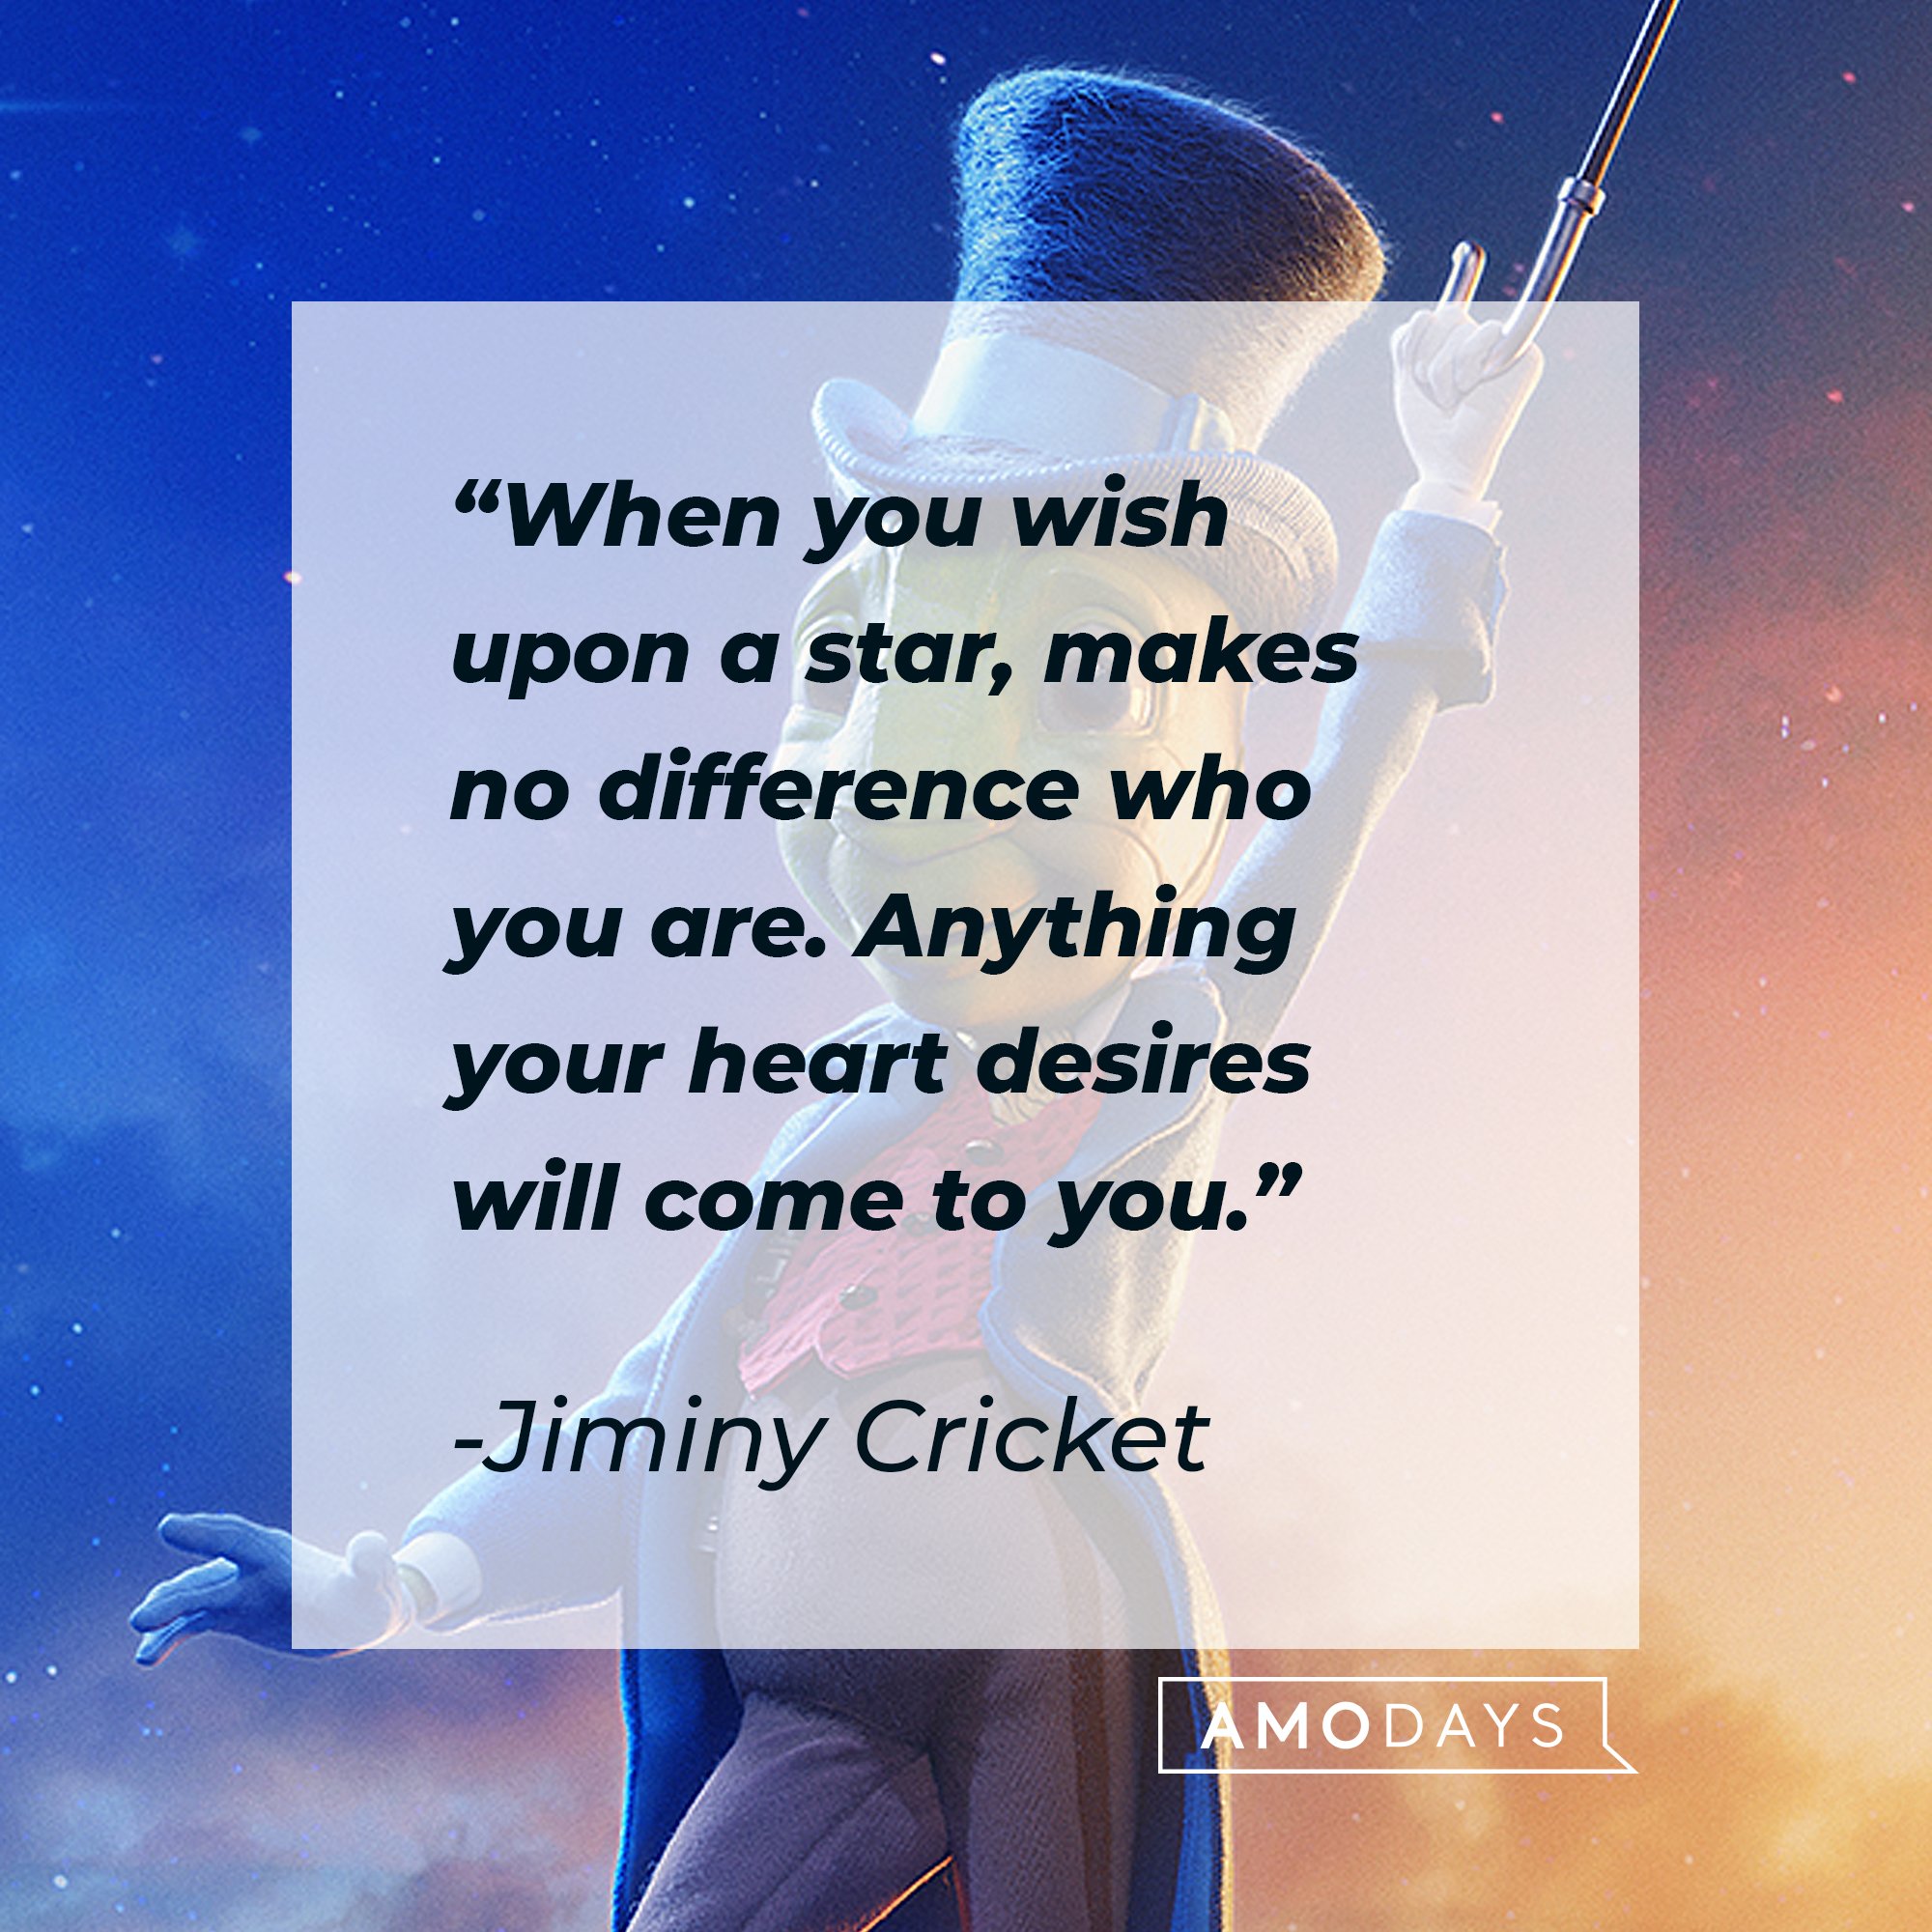  Jiminy Cricket's quote: "When you wish upon a star, makes no difference who you are. Anything your heart desires will come to you." | Image: AmoDays